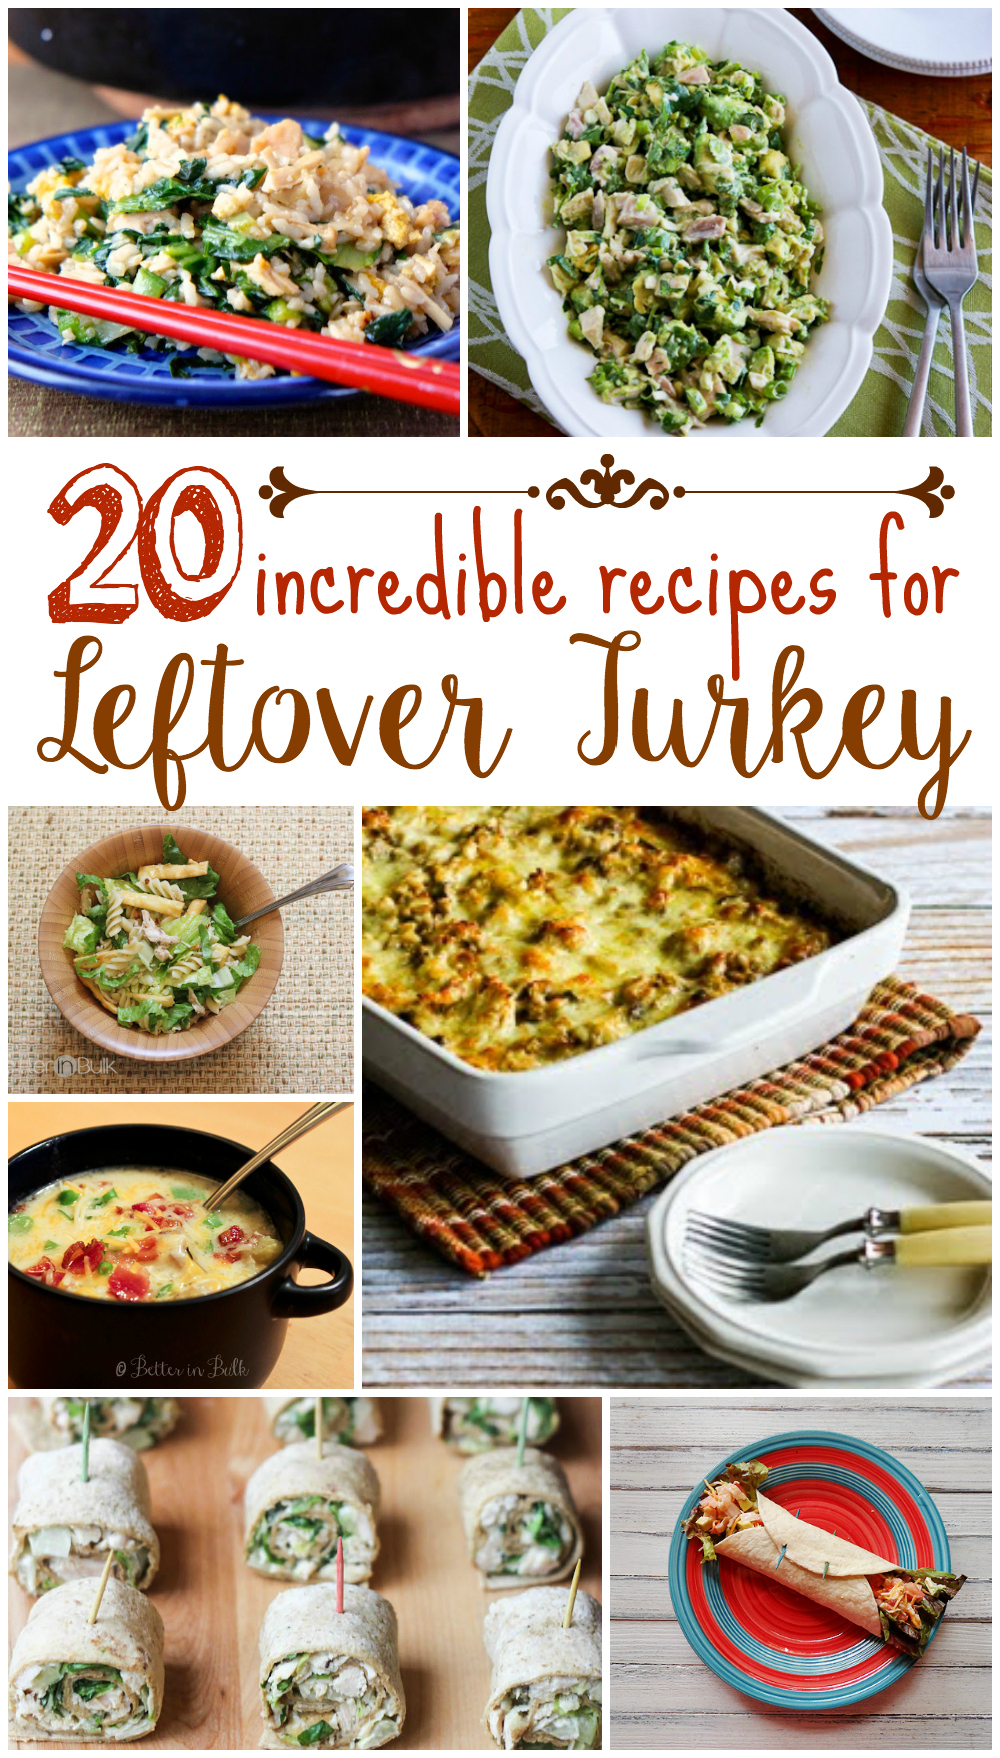 20 Incredible Recipes for Leftover Turkey - Food Fun Family